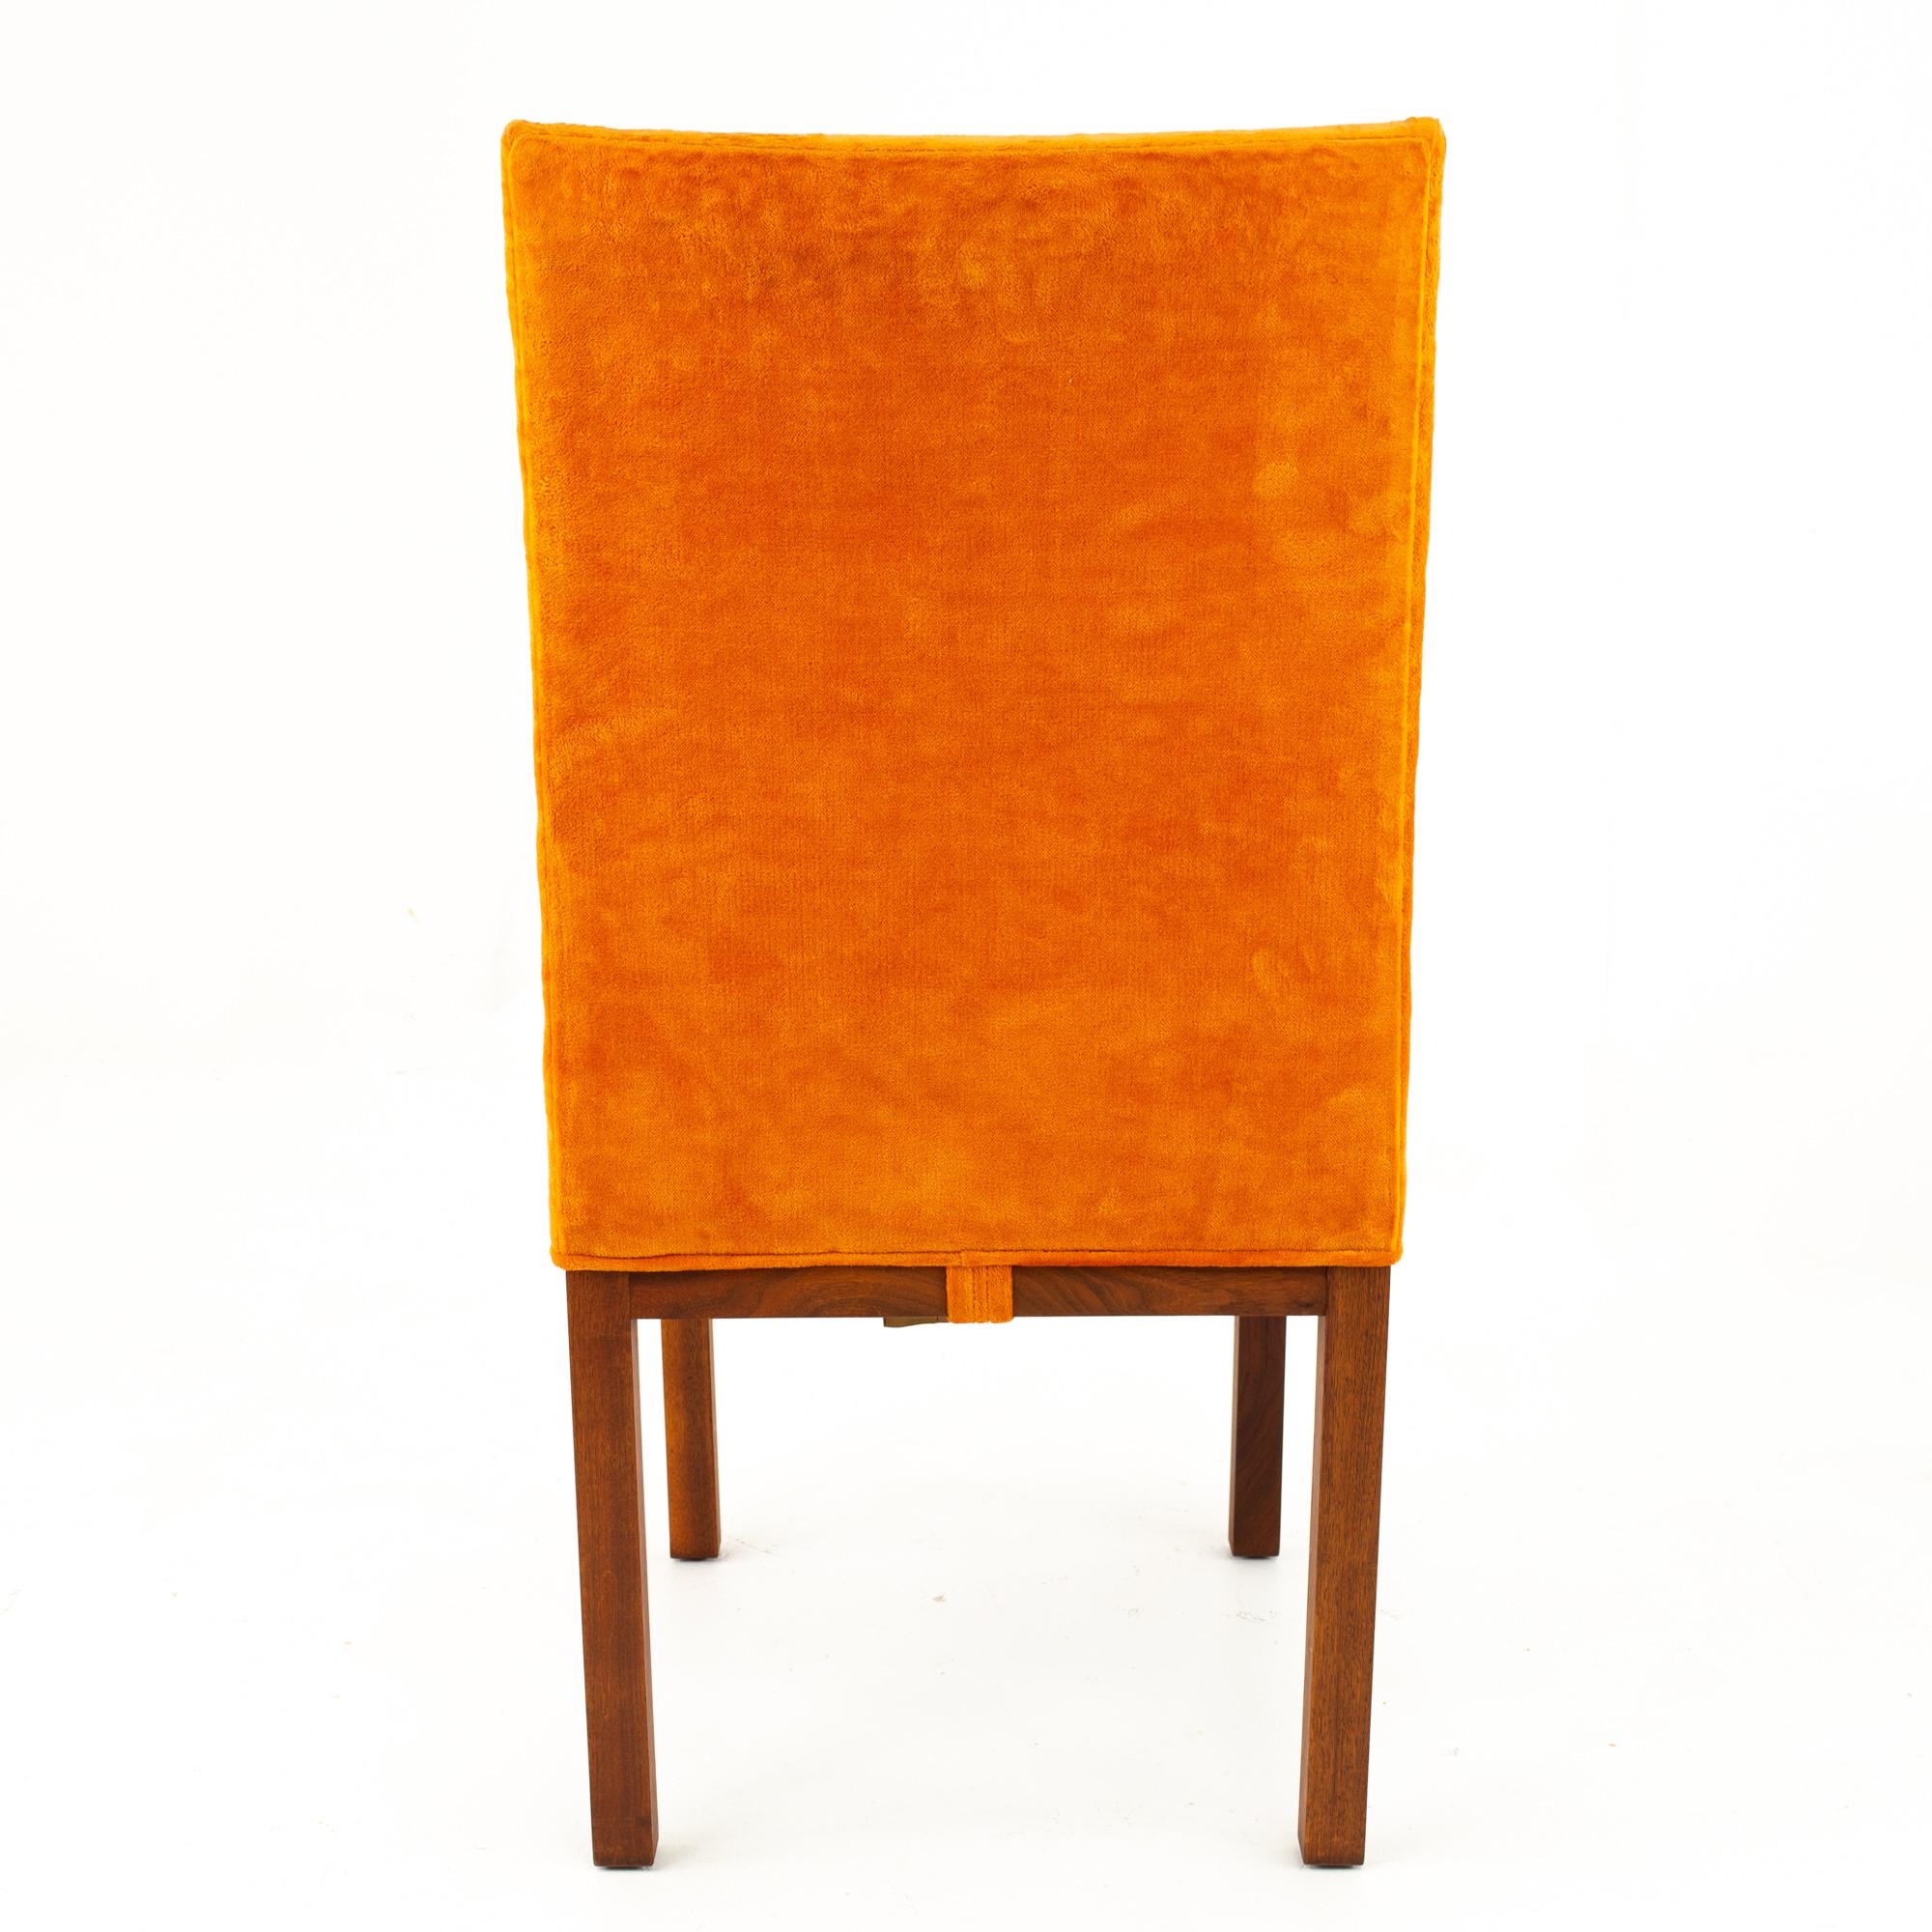 Milo Baughman Style Dillingham Orange and Walnut Upholstered Dining Chairs - Set 9